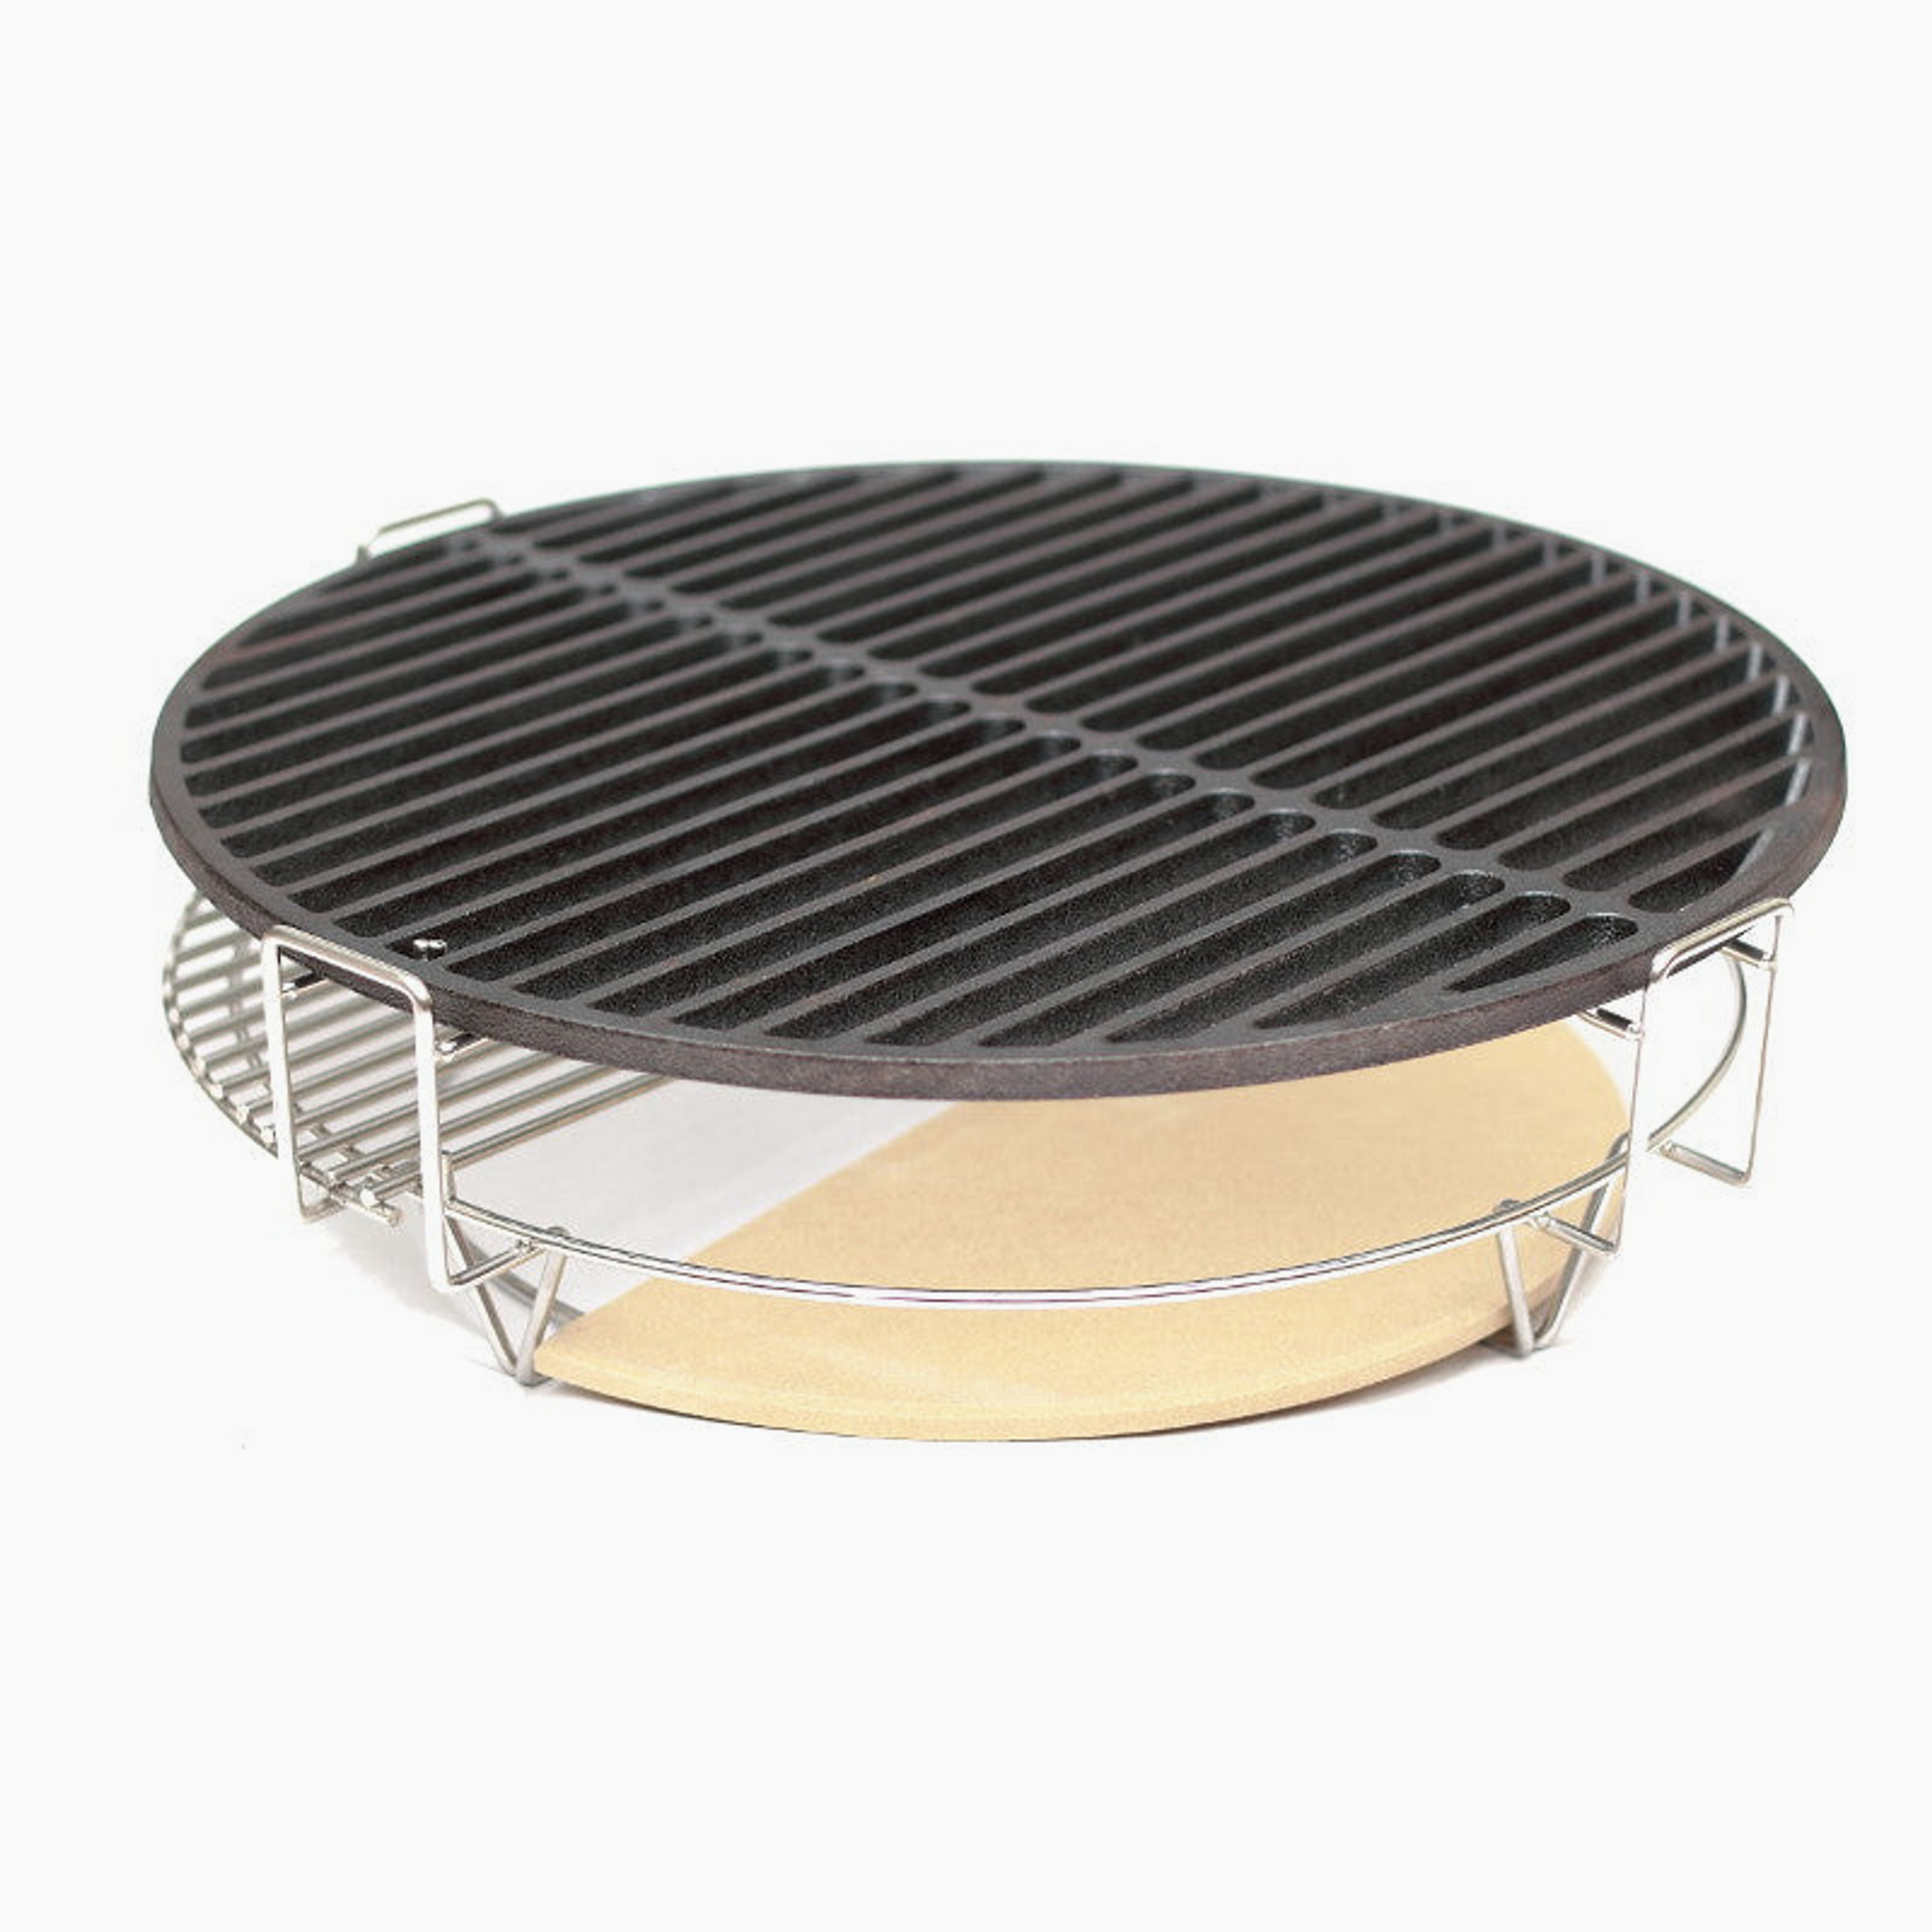 Cast Iron Cooking Grate, 18 Inch - Designed for the Big Green Egg